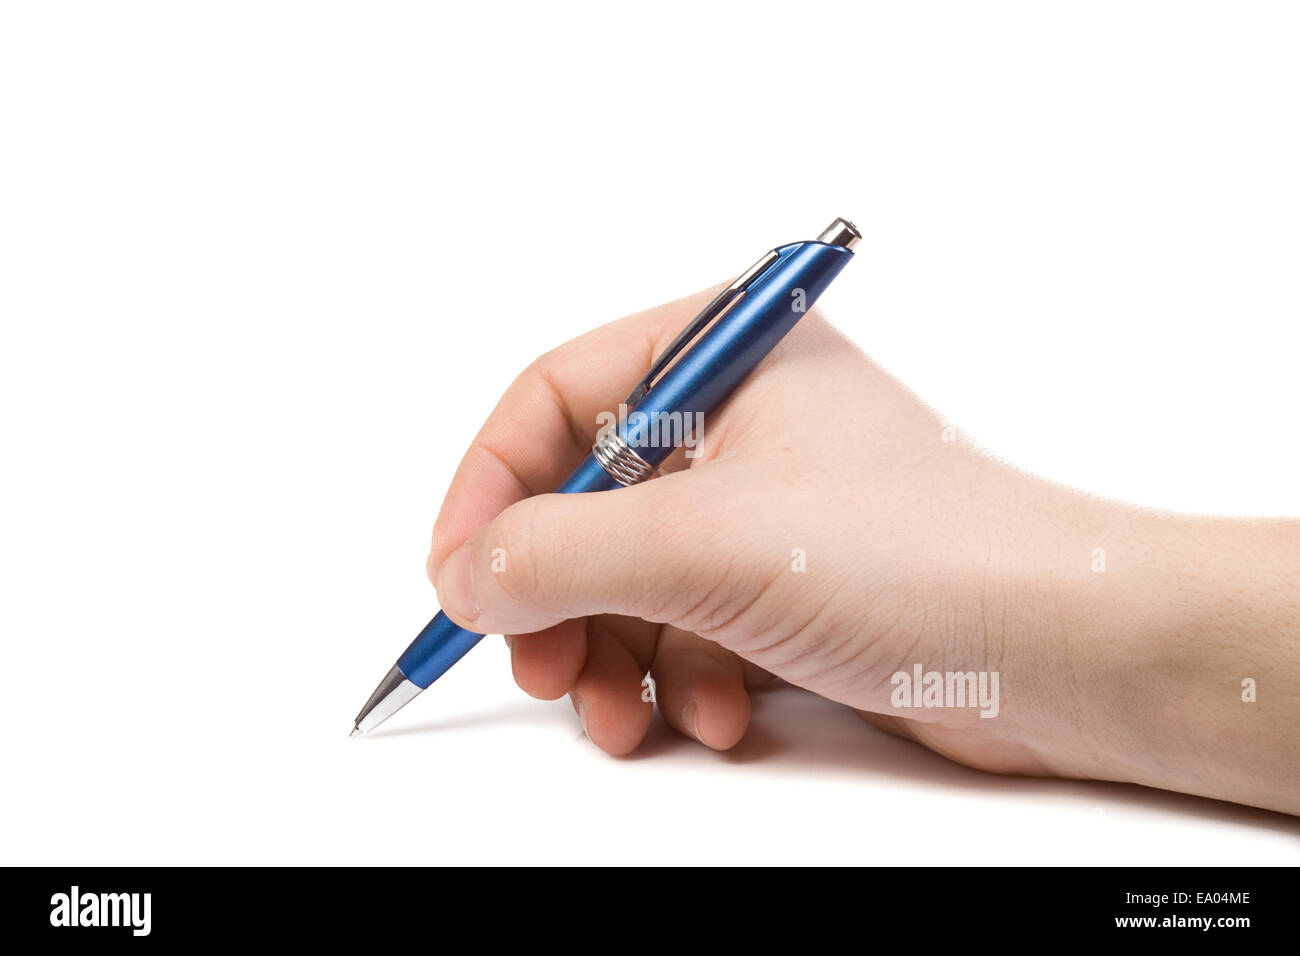 isolated hand holding blue pen Stock Photo